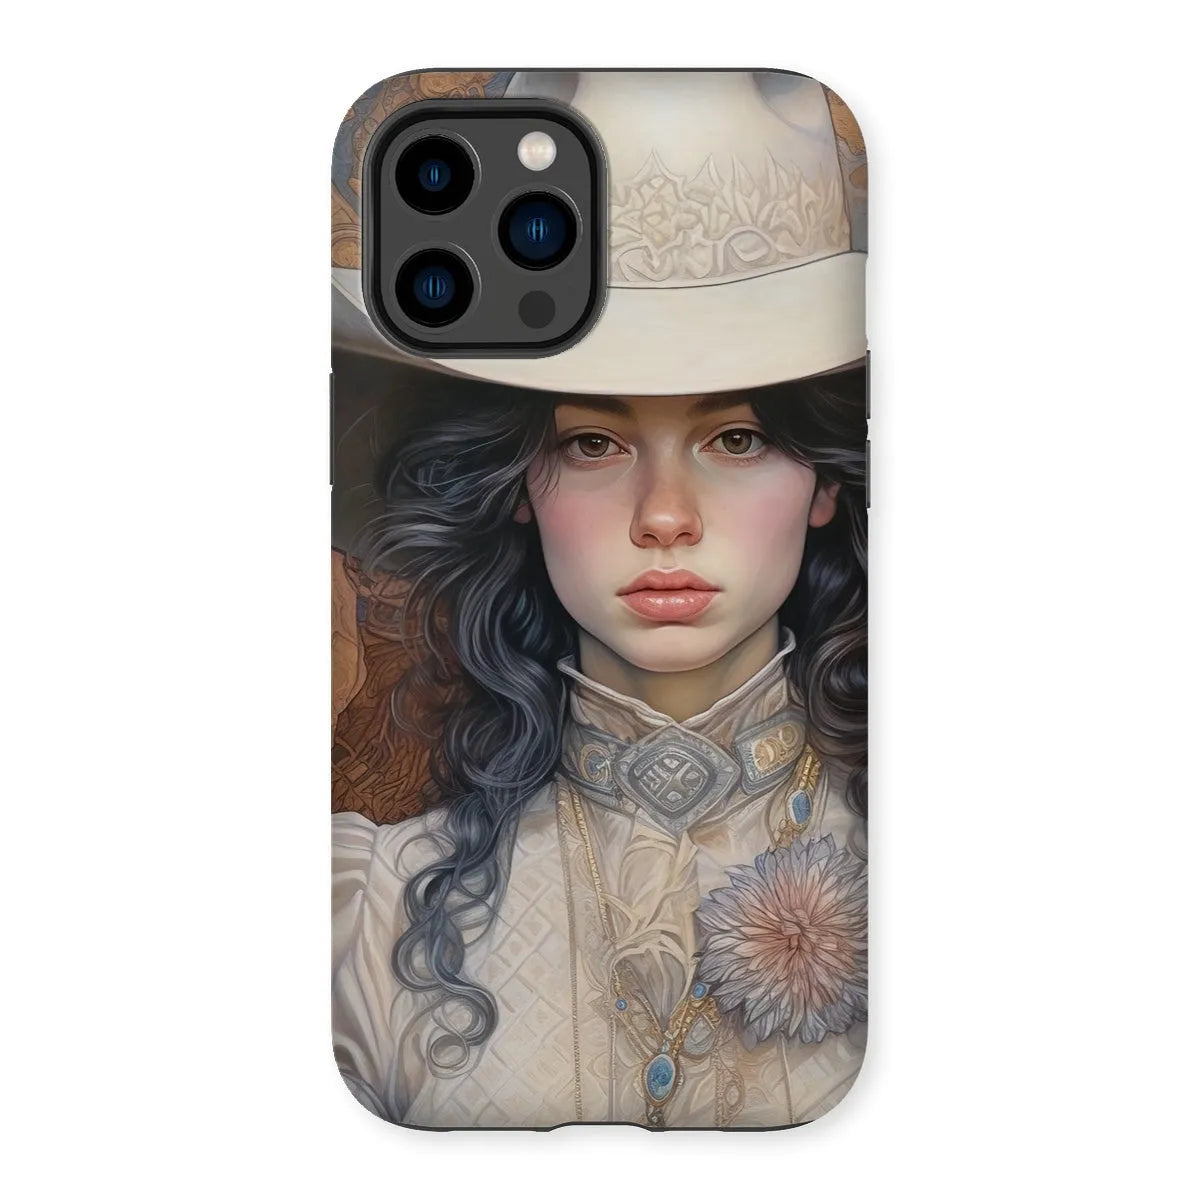 Helena The Lesbian Cowgirl - Sapphic Art Phone Case - Iphone 14 Pro Max / Matte - Mobile Phone Cases - Aesthetic Art